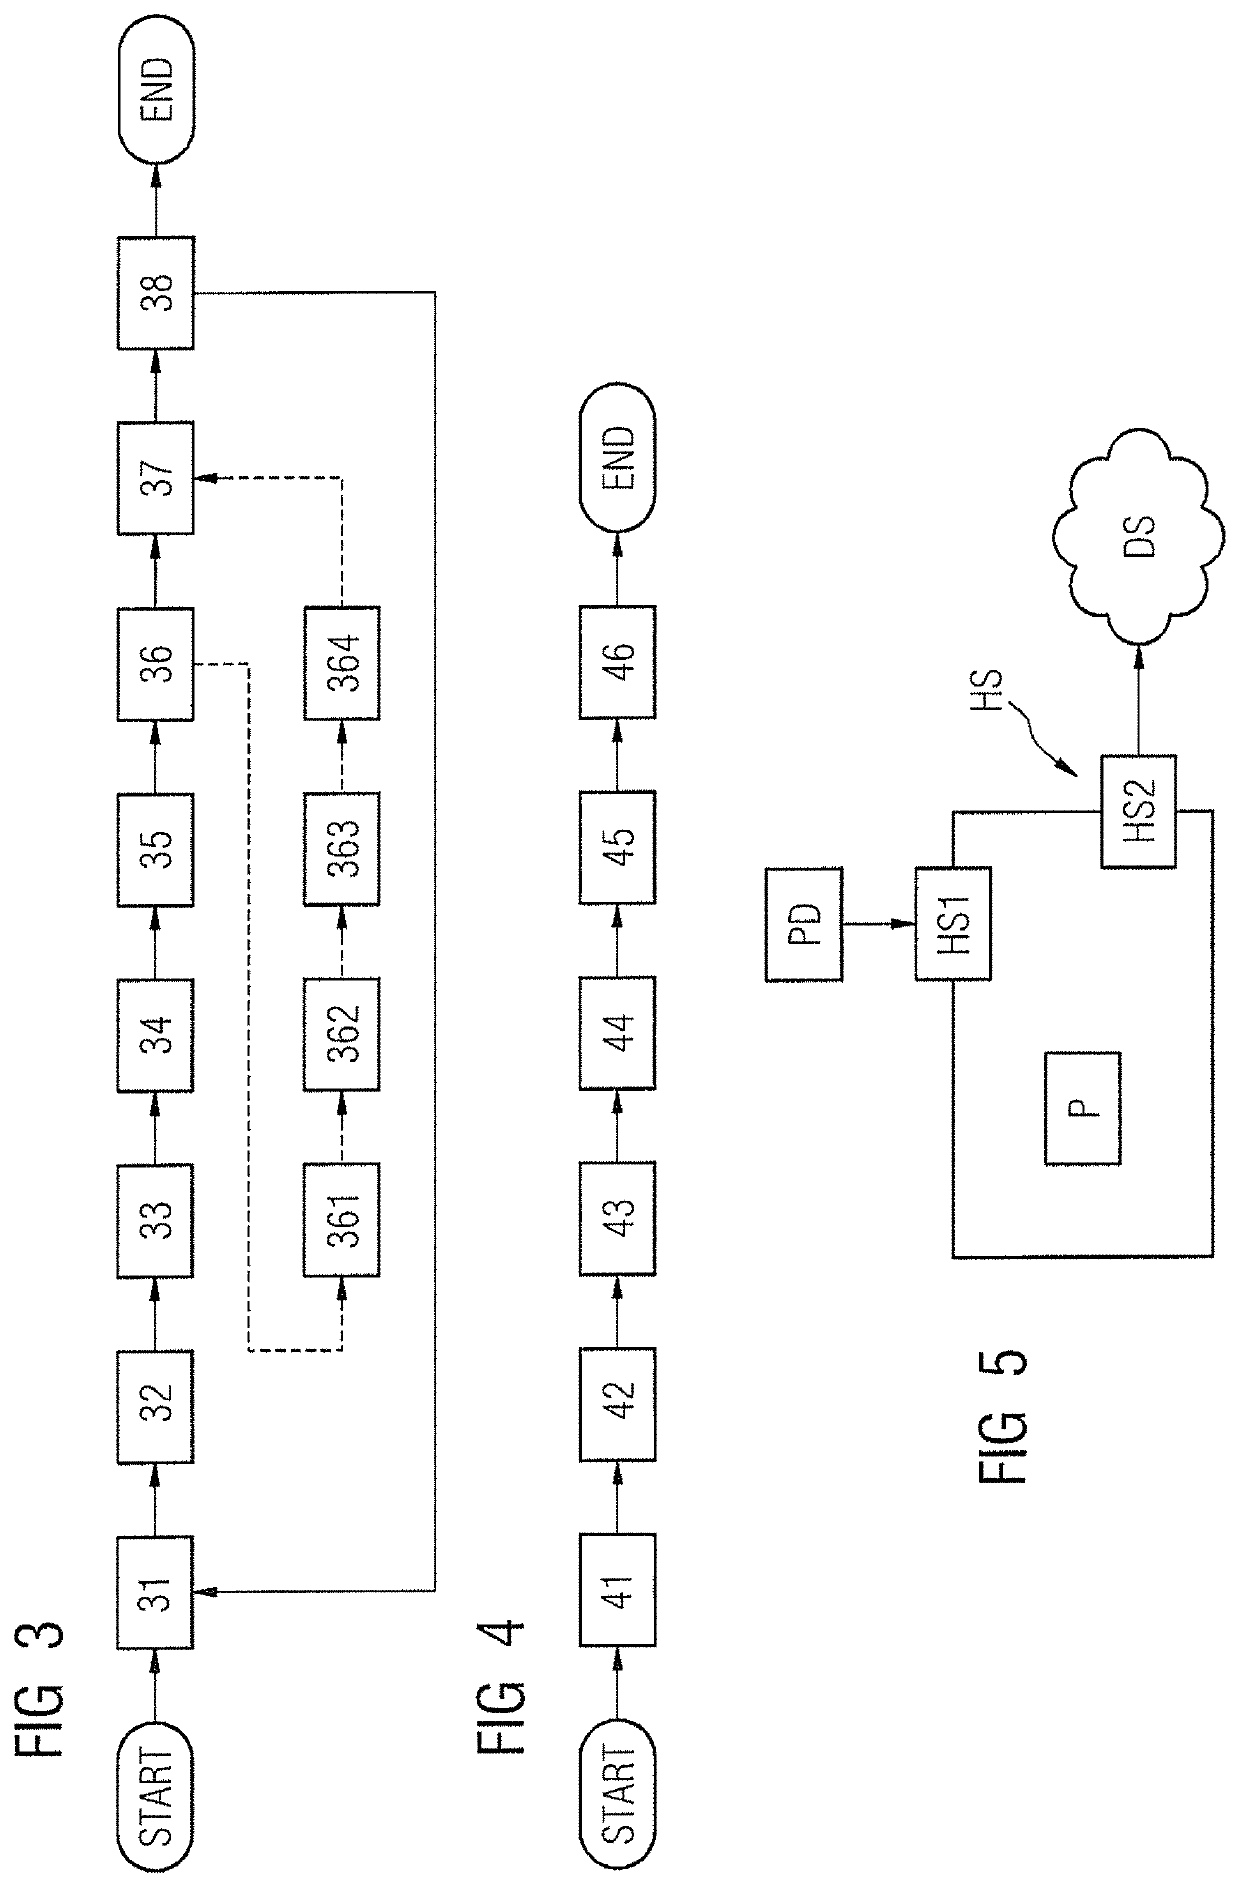 Method, server and communication system for secure delivery of patient's image and consent data